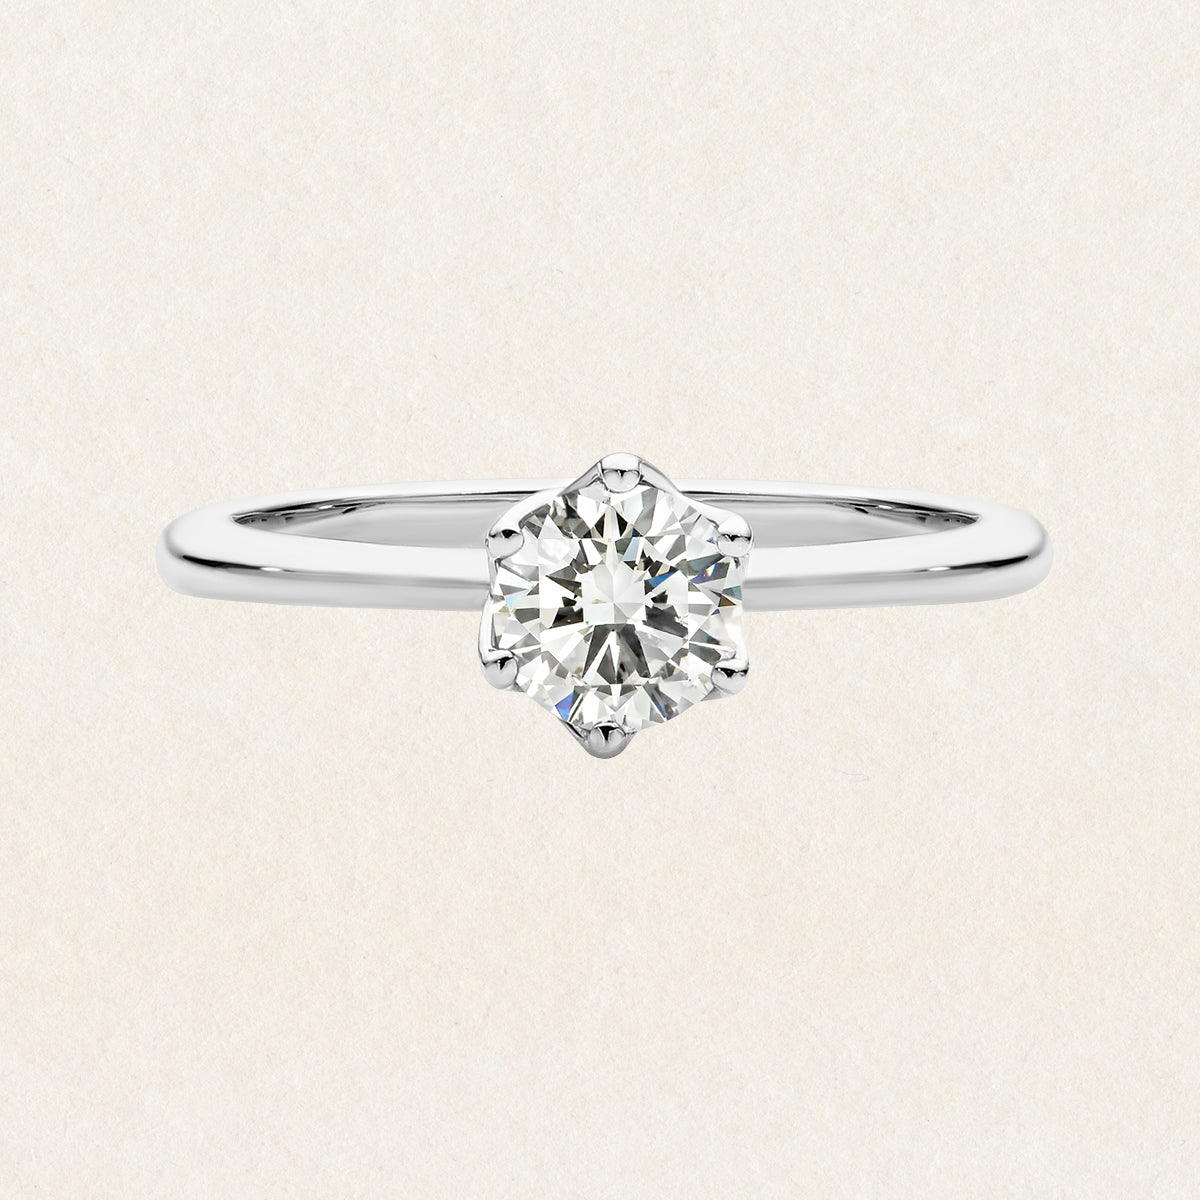 Brilliant round cut 1.00ct lab grown diamond solitaire ring made with 18k white gold